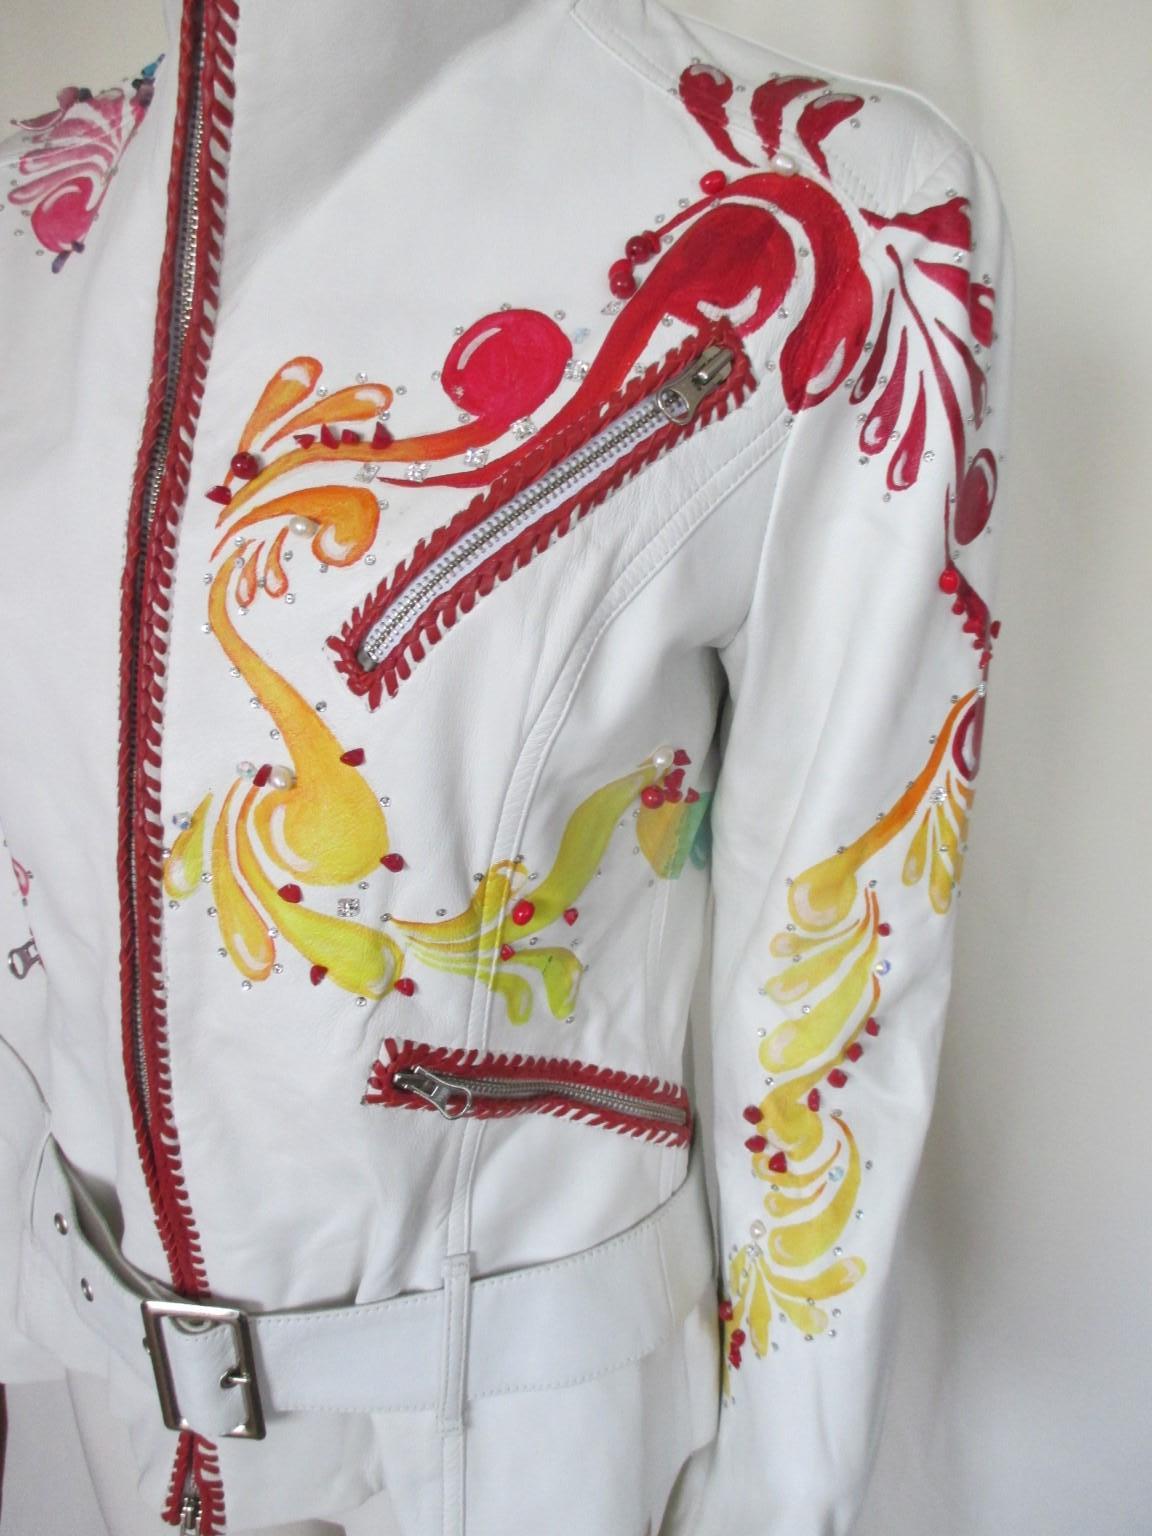 This is an exclusive white leather handpainted blue/pink flowers jacket

We offer more exclusive vintage items, view our frontstore.

Details:
Made of leather, with colorful flowers
Embroidered with pearls , stones , shells
With closing zipper, 4